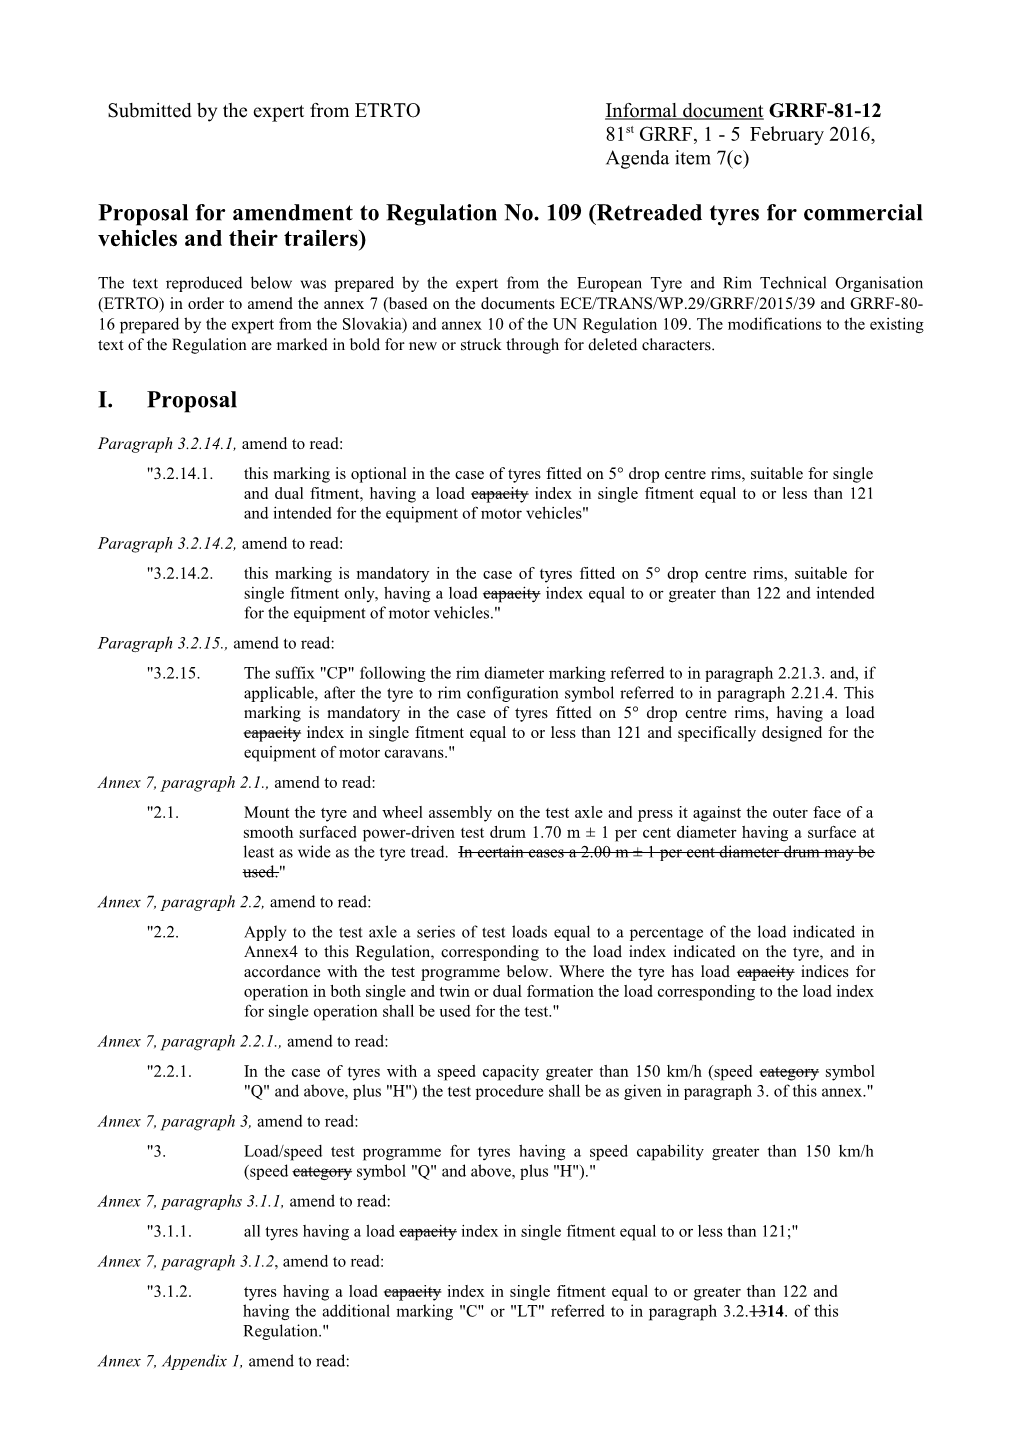 Proposal for Amendment Toregulation No. 109(Retreaded Tyres for Commercial Vehicles And